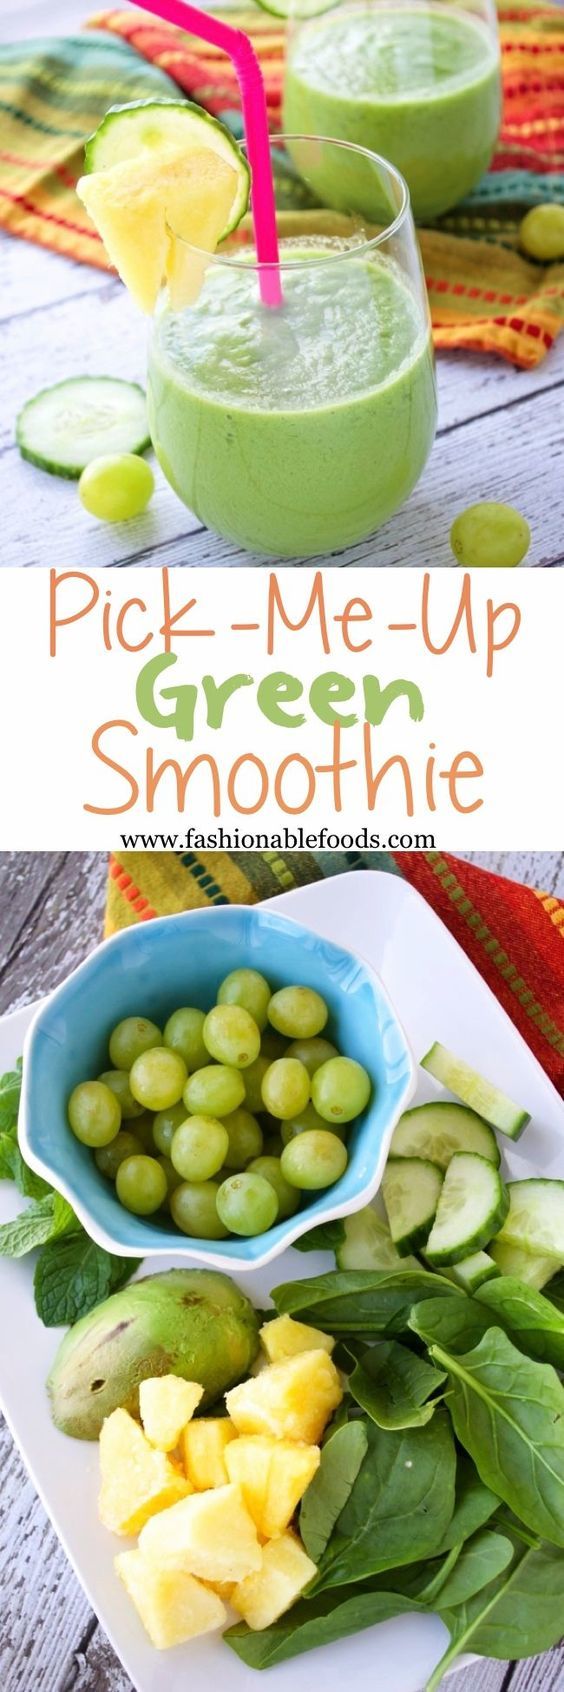 Get additional info on healthy smoothie recipes like this perfect pick green smoothie. | 3 day green smoothie detox | green smoothie recipes | green smoothie recipes for weight loss | low sugar green smoothie recipes #nobake #nutrition #wellness #healthyeating #mealprep #keepingfit #weightloss